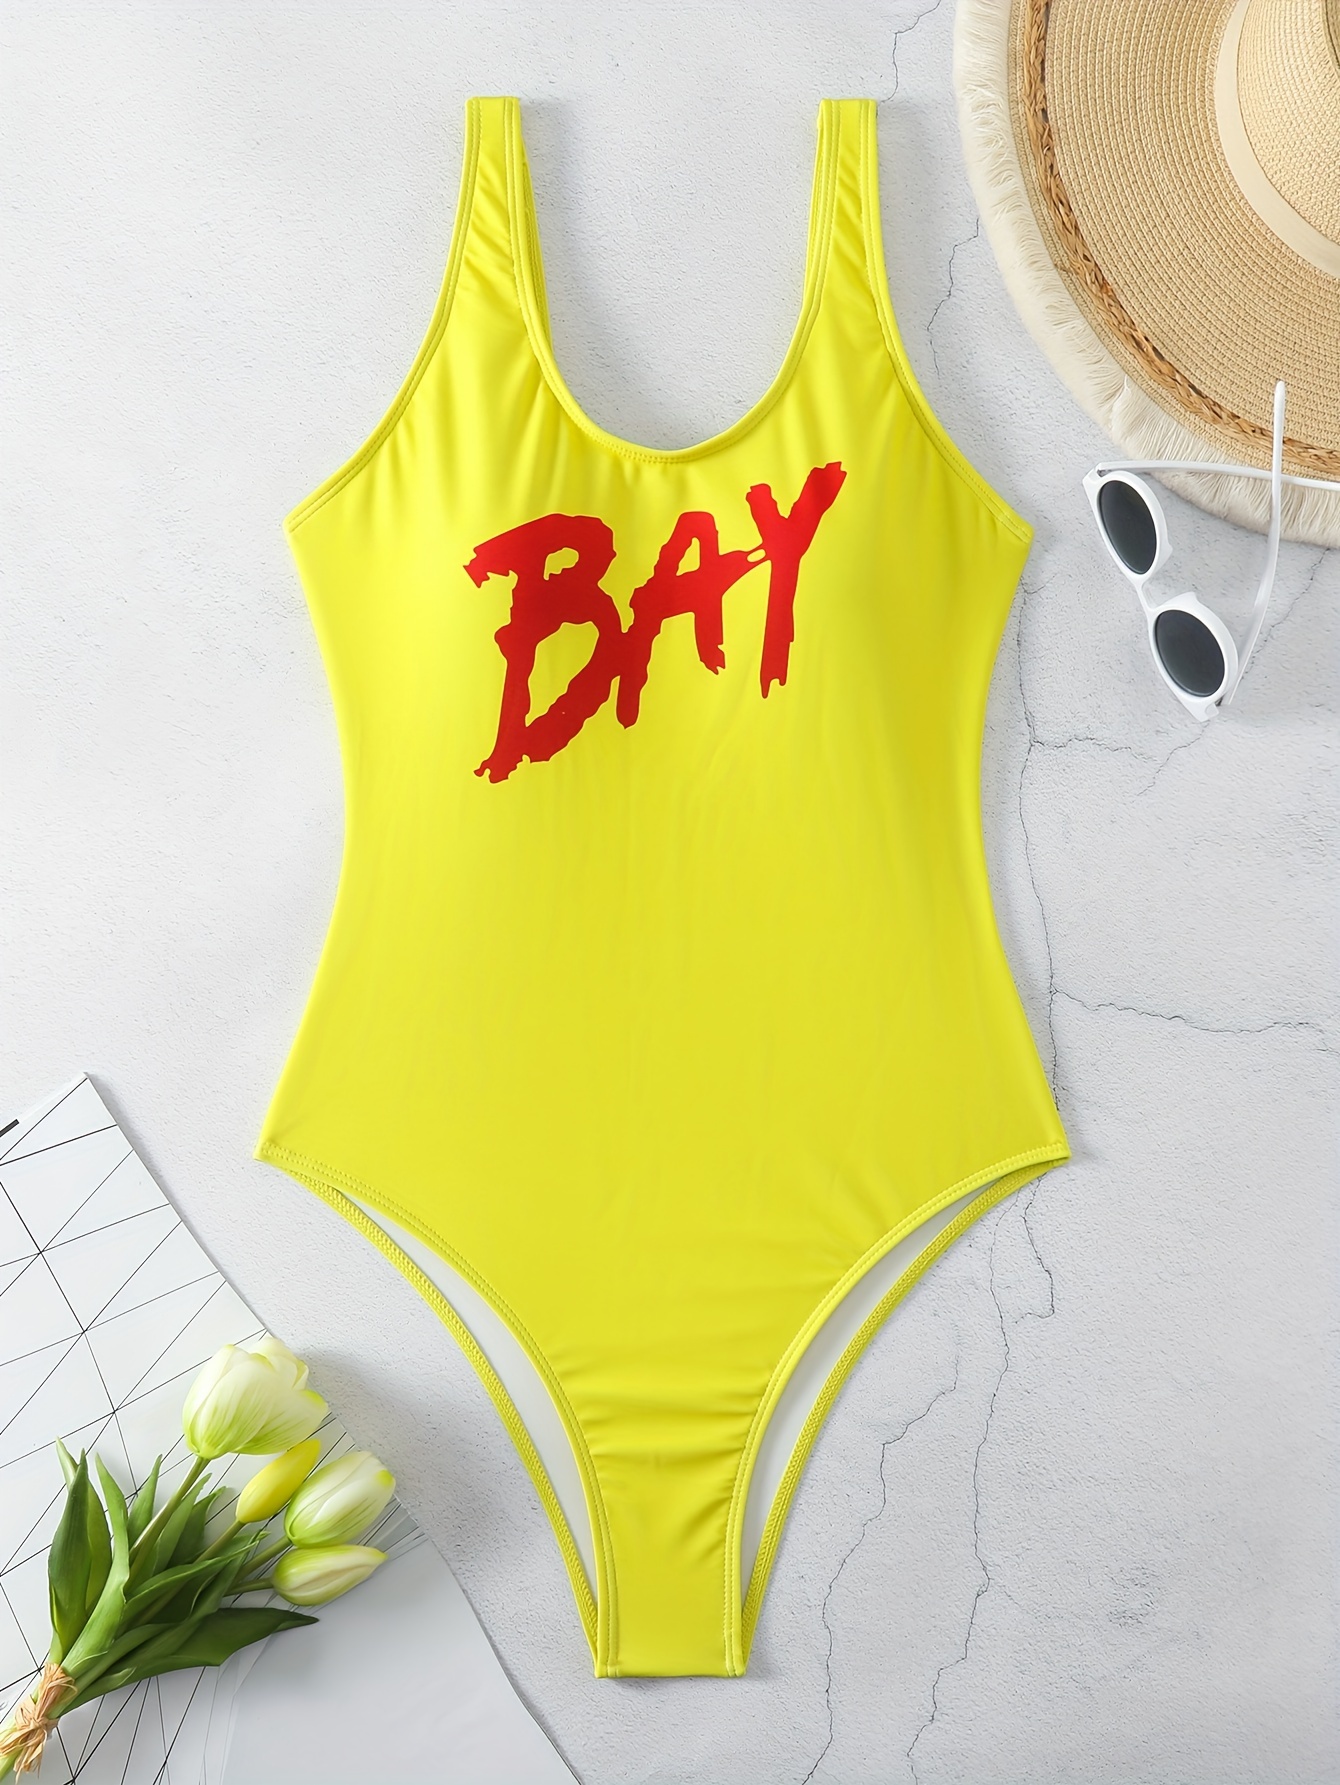 Seam Contoured Zip Front Swimsuit, Black & Yellow Short Wetsuit Style  Bathing Suit For Surfing & Diving, Women's Swimwear